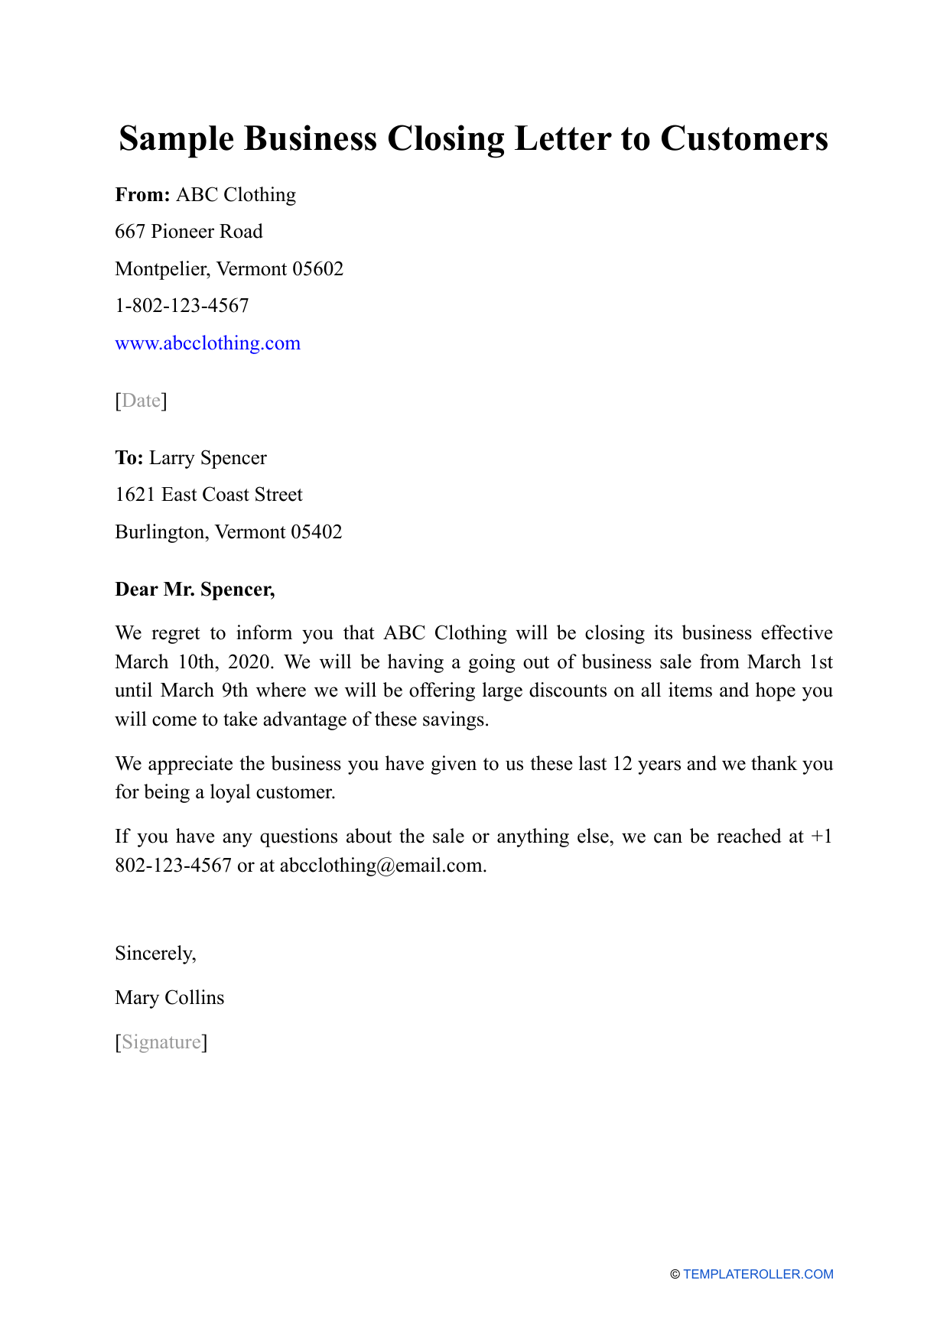 Sample Business Closing Letter to Customers, Page 1